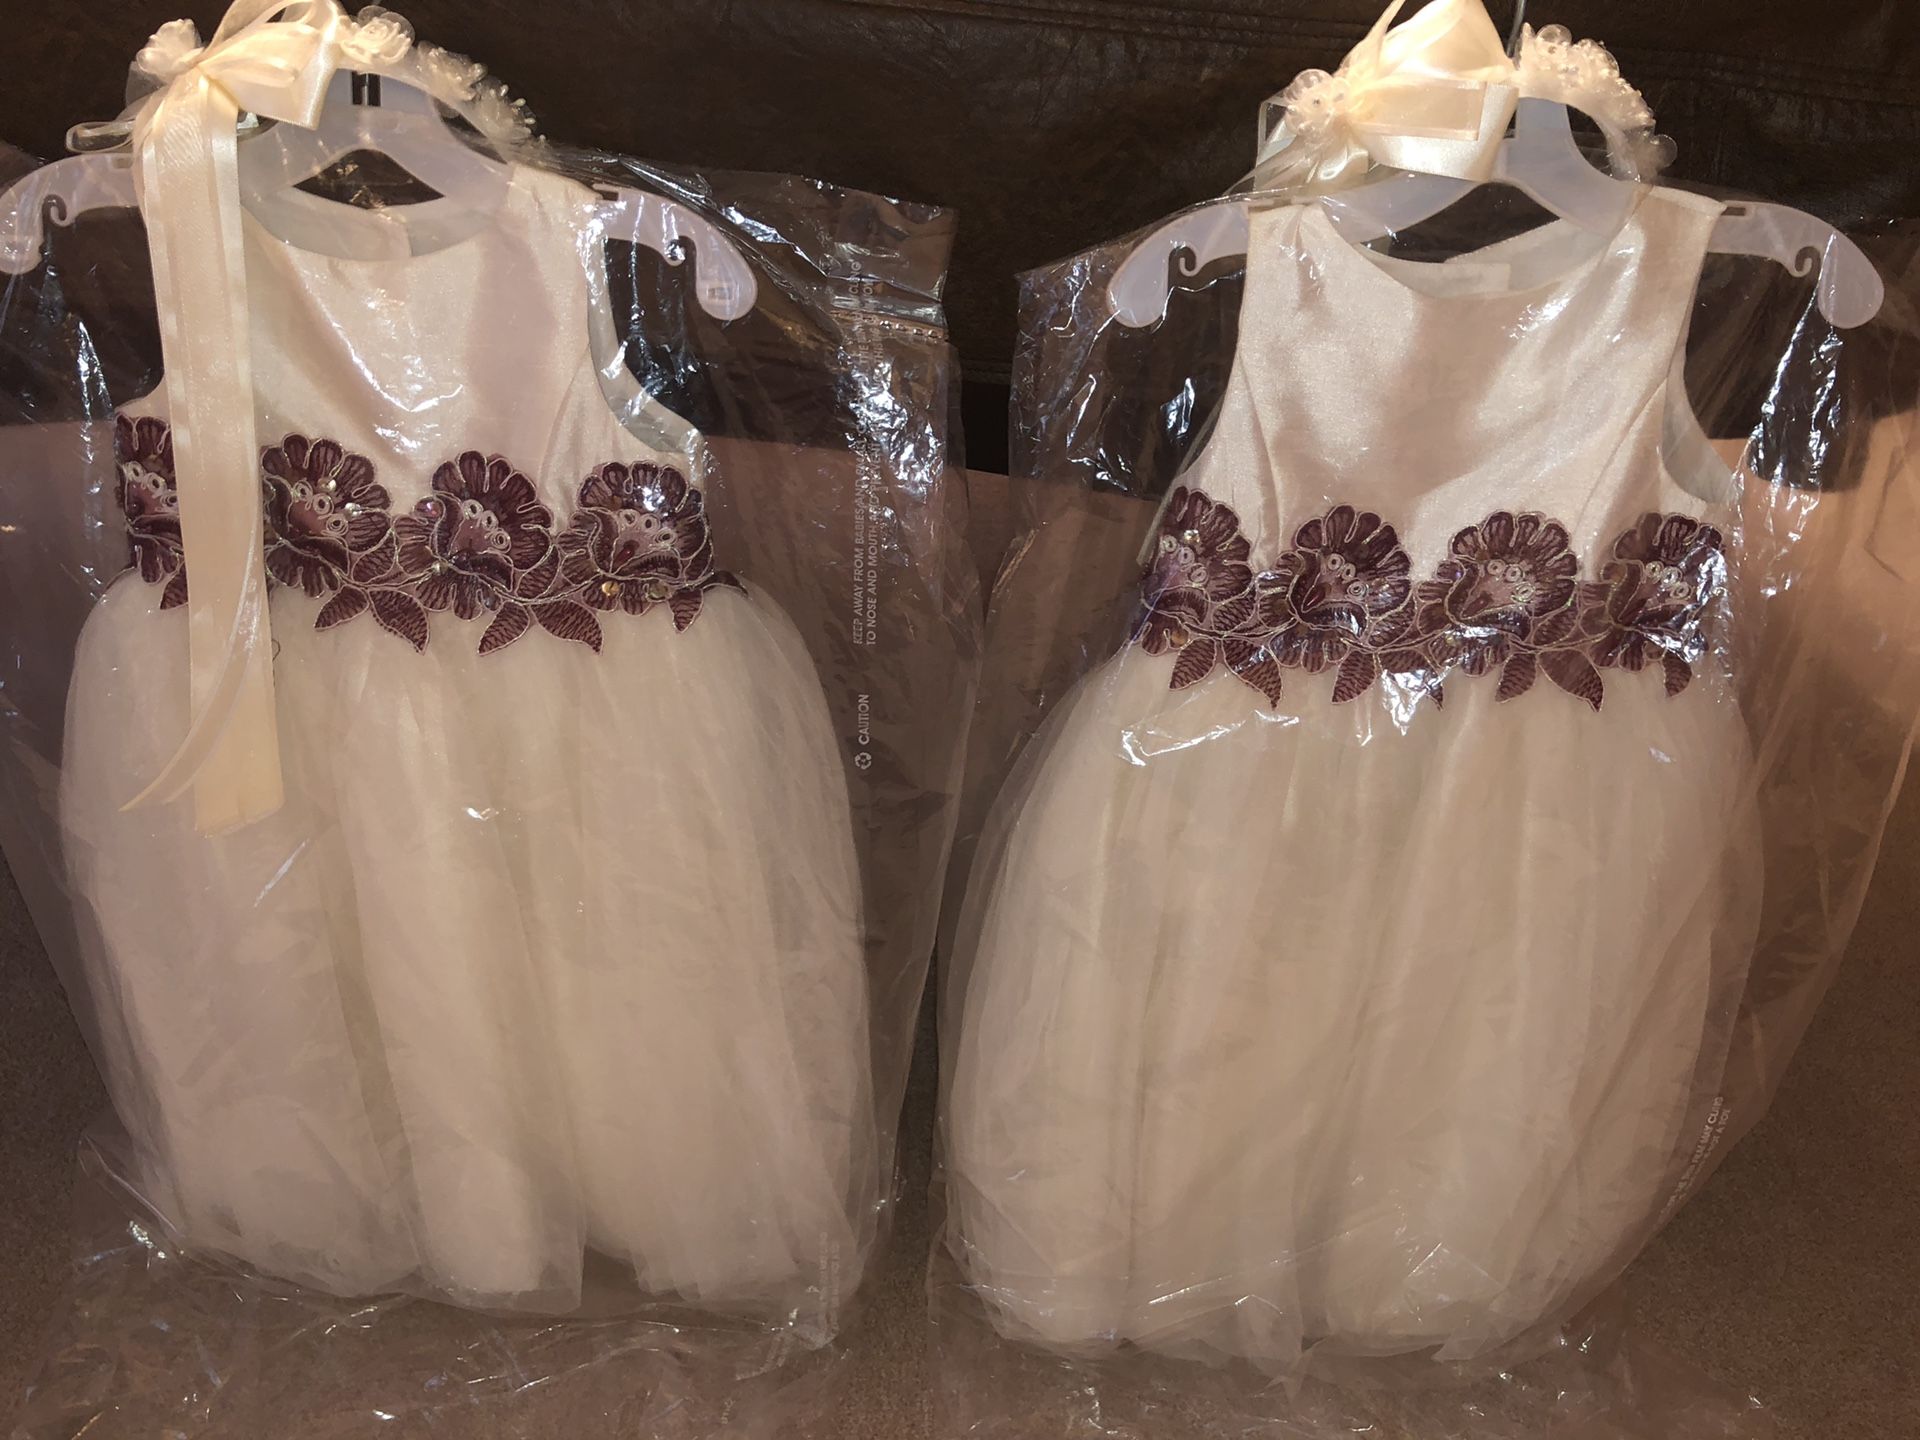 Flower girl dresses size 5 & 6 with flower crowns $50